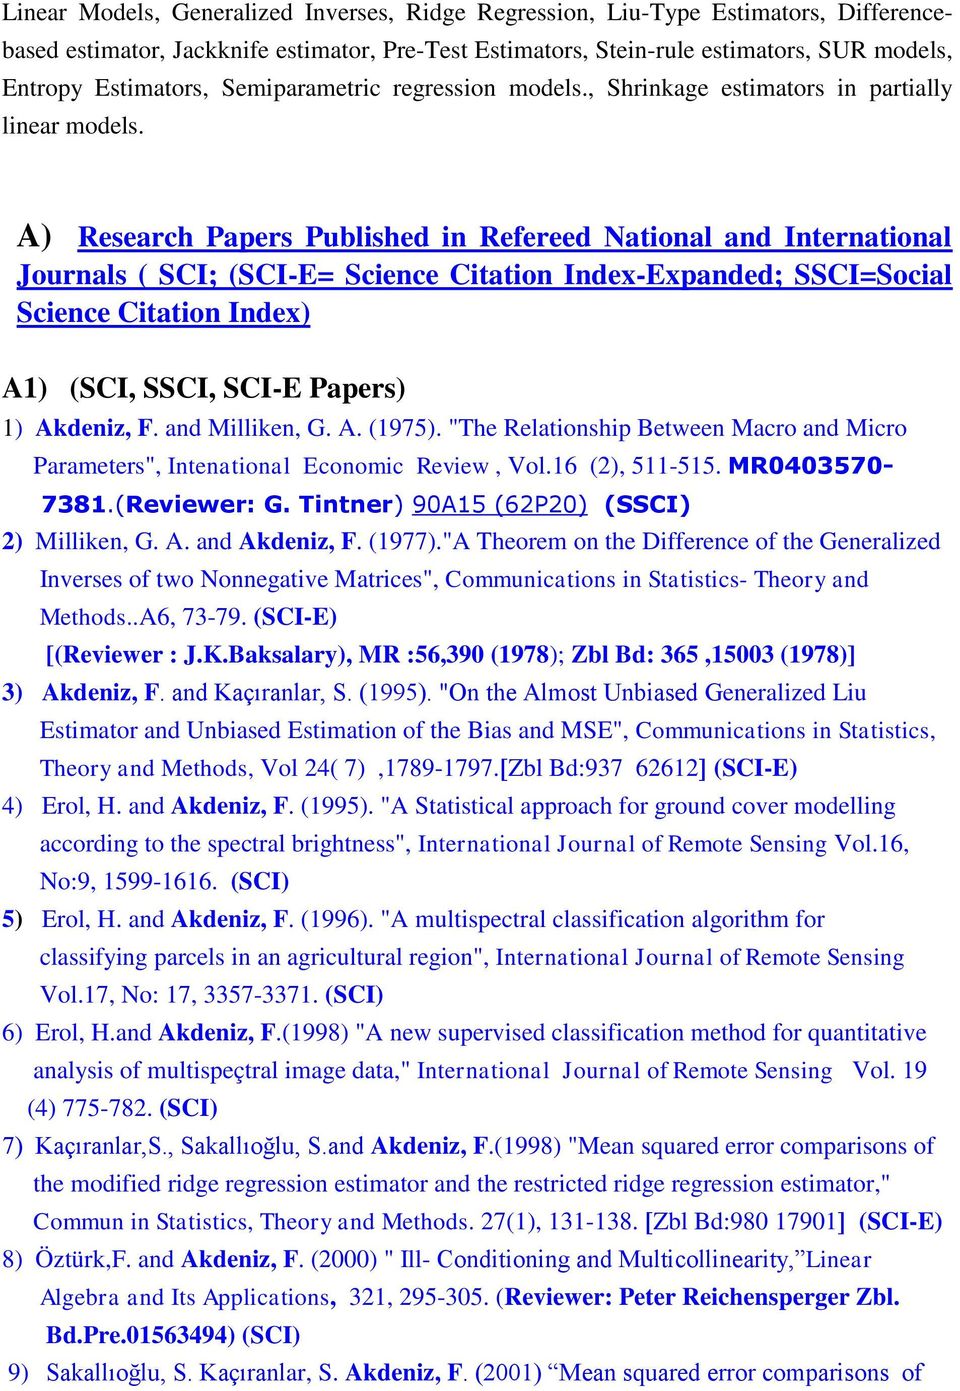 A) Research Papers Published in Refereed National and International Journals ( SCI; (SCI-E= Science Citation Index-Expanded; SSCI=Social Science Citation Index) A1) (SCI, SSCI, SCI-E Papers) 1)